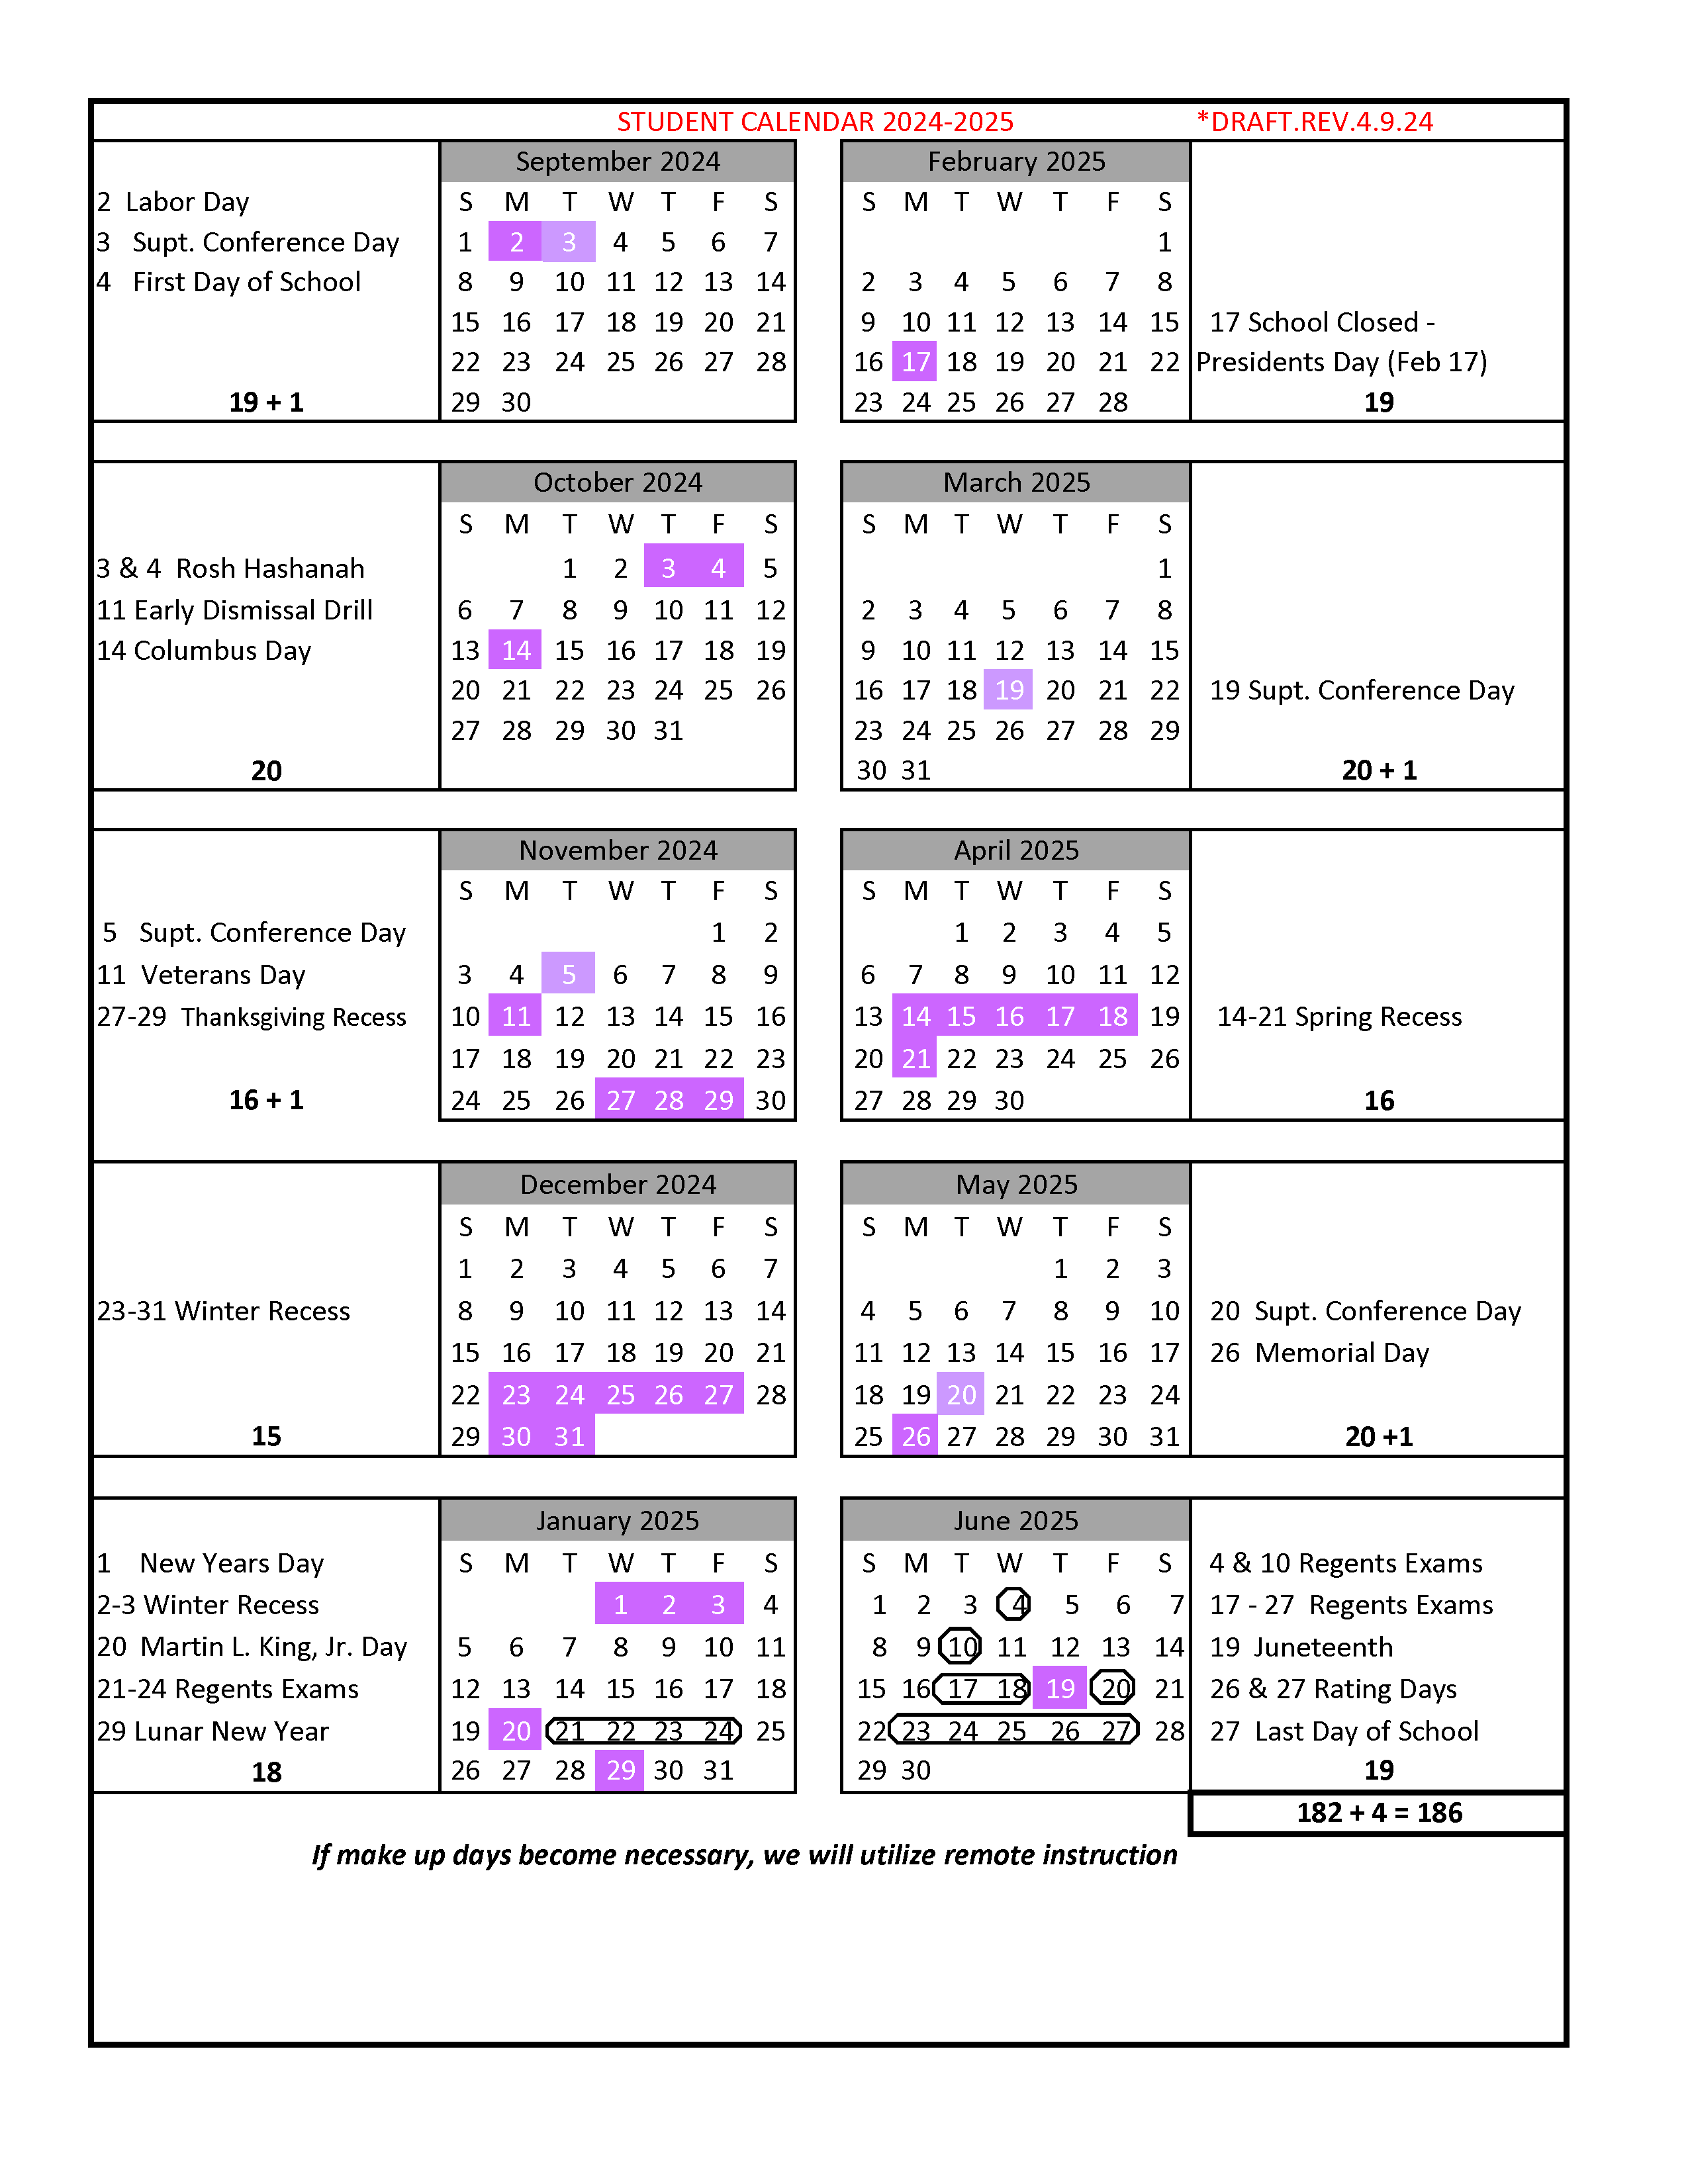 image of student calendar for 2024-25 school year